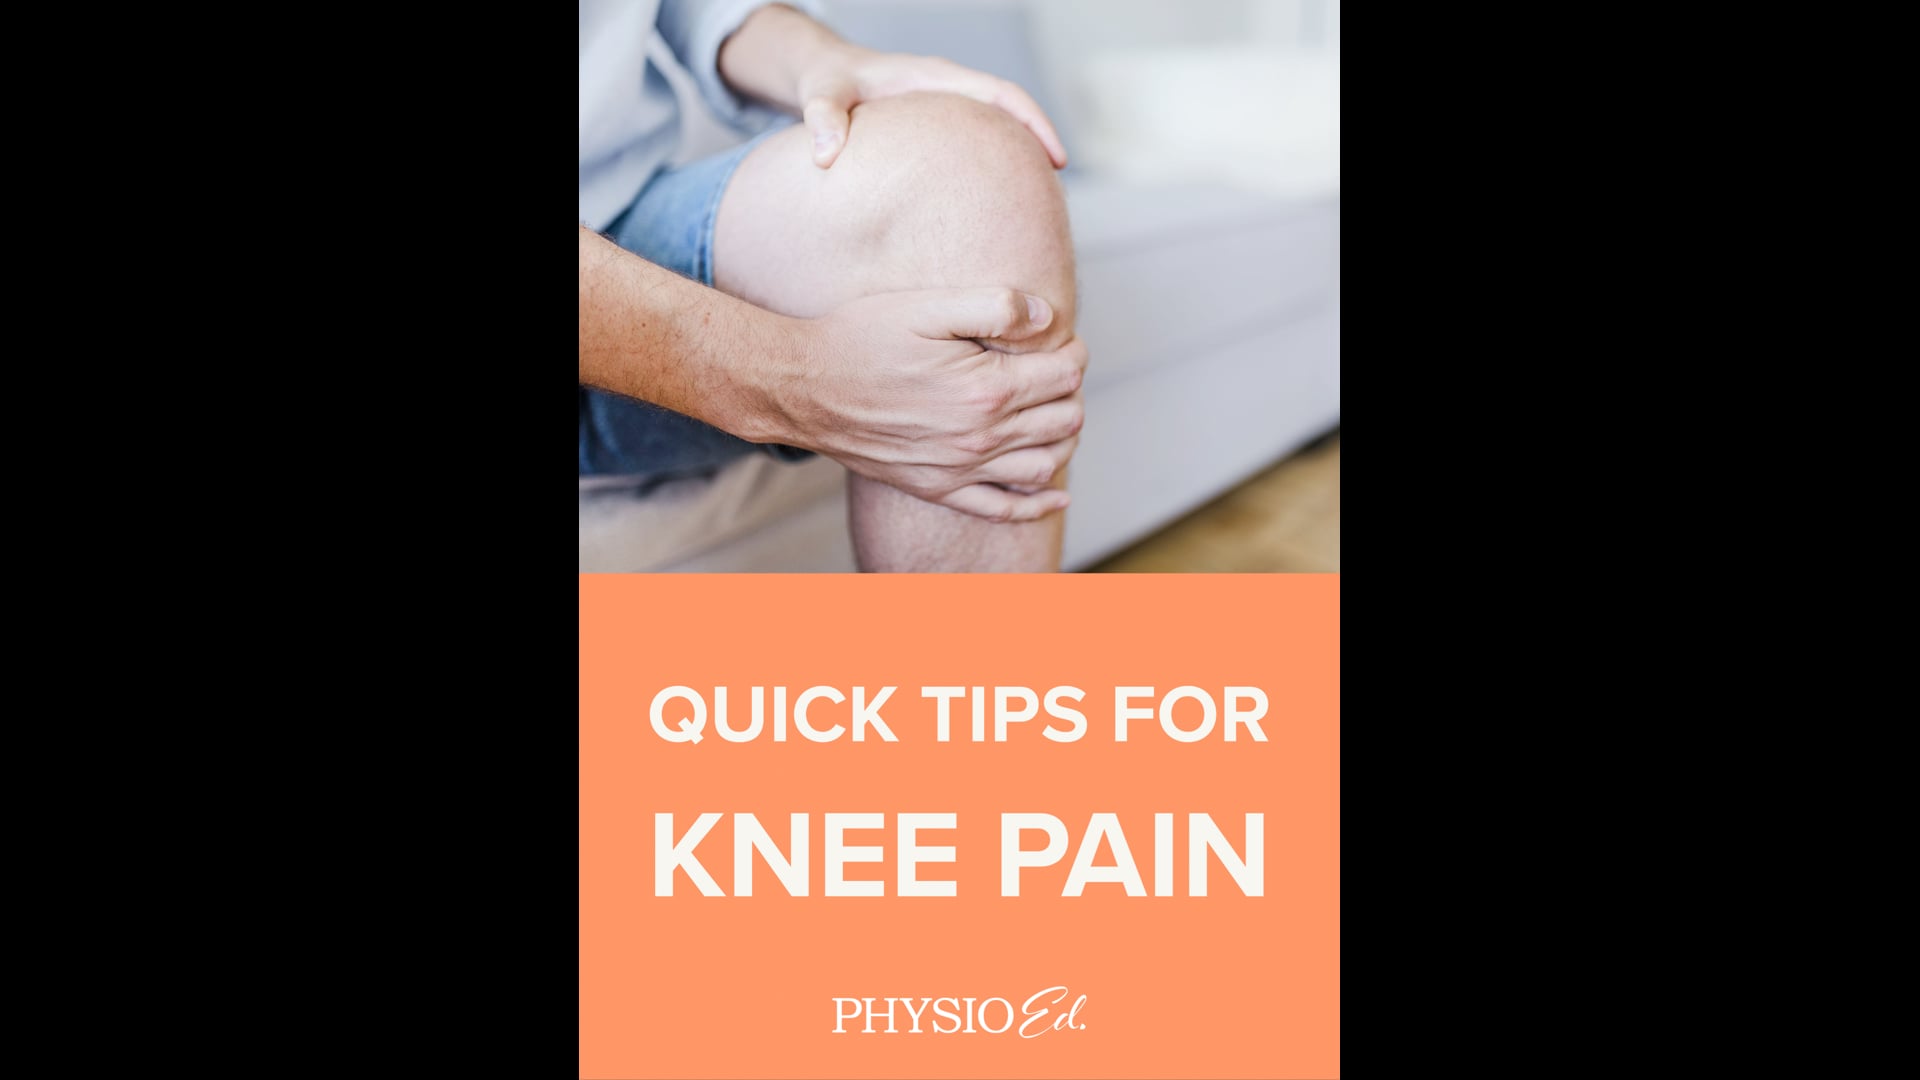 5 Quick Tips for Knee Pain